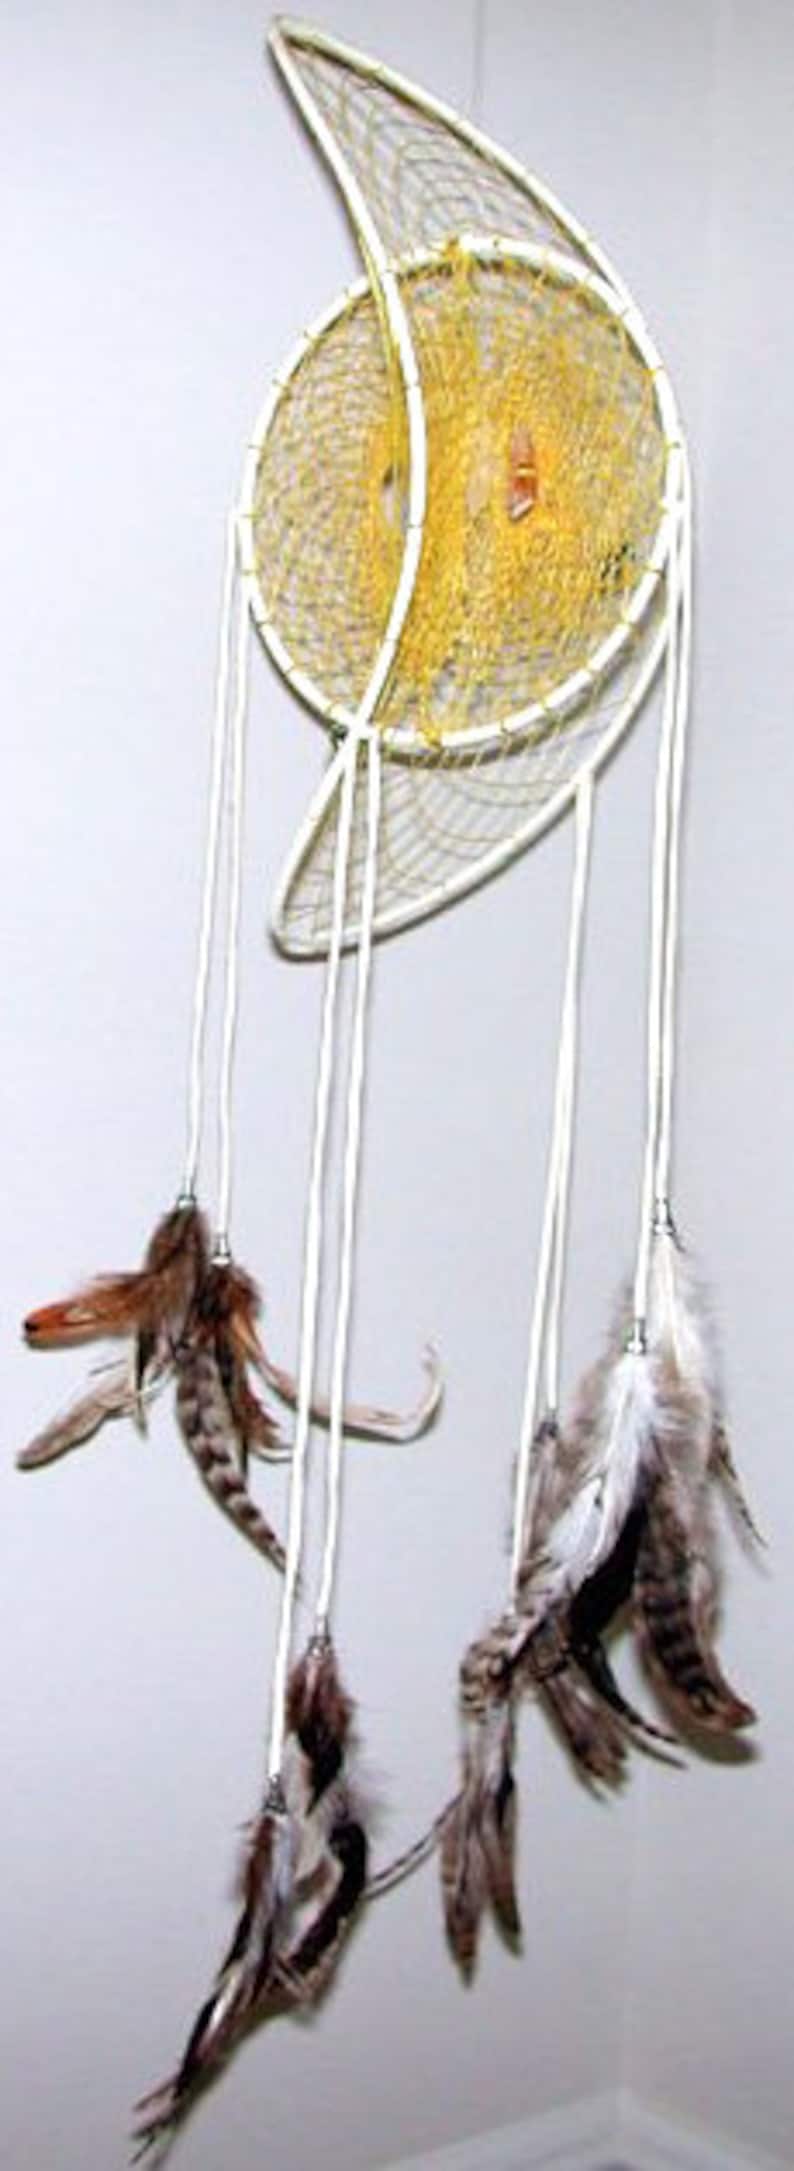 Custom Large Multi-dimentional Dreamcatcher with Crystals and Power Animal, Made to order extra large Dreamcatcher, Totally Customized white deerskin